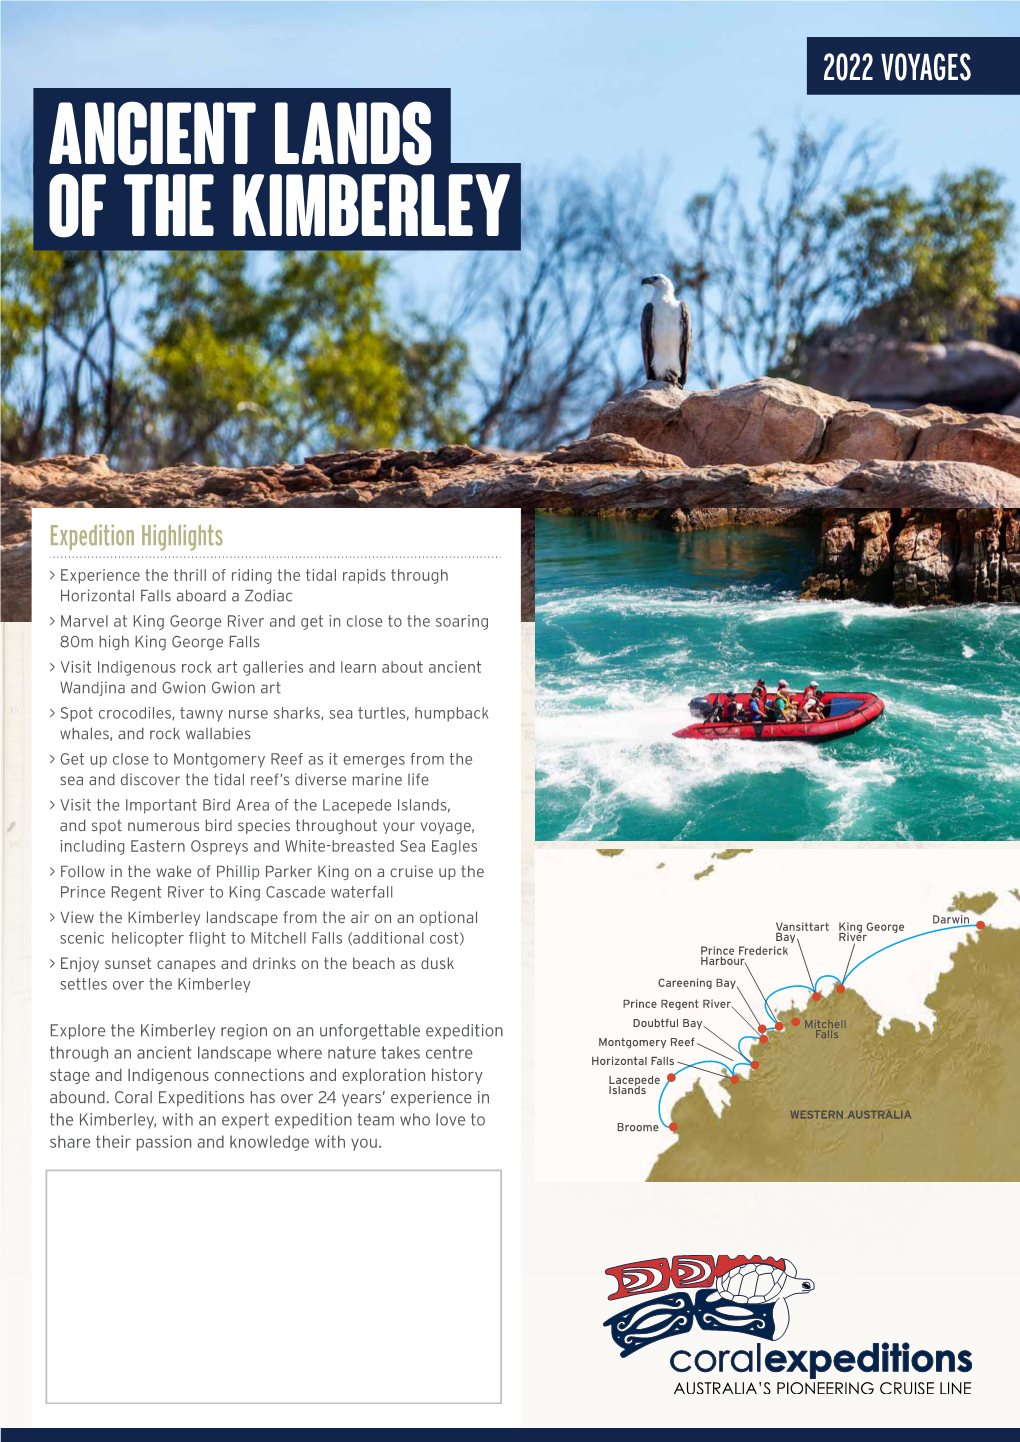 Ancient Lands of the Kimberley